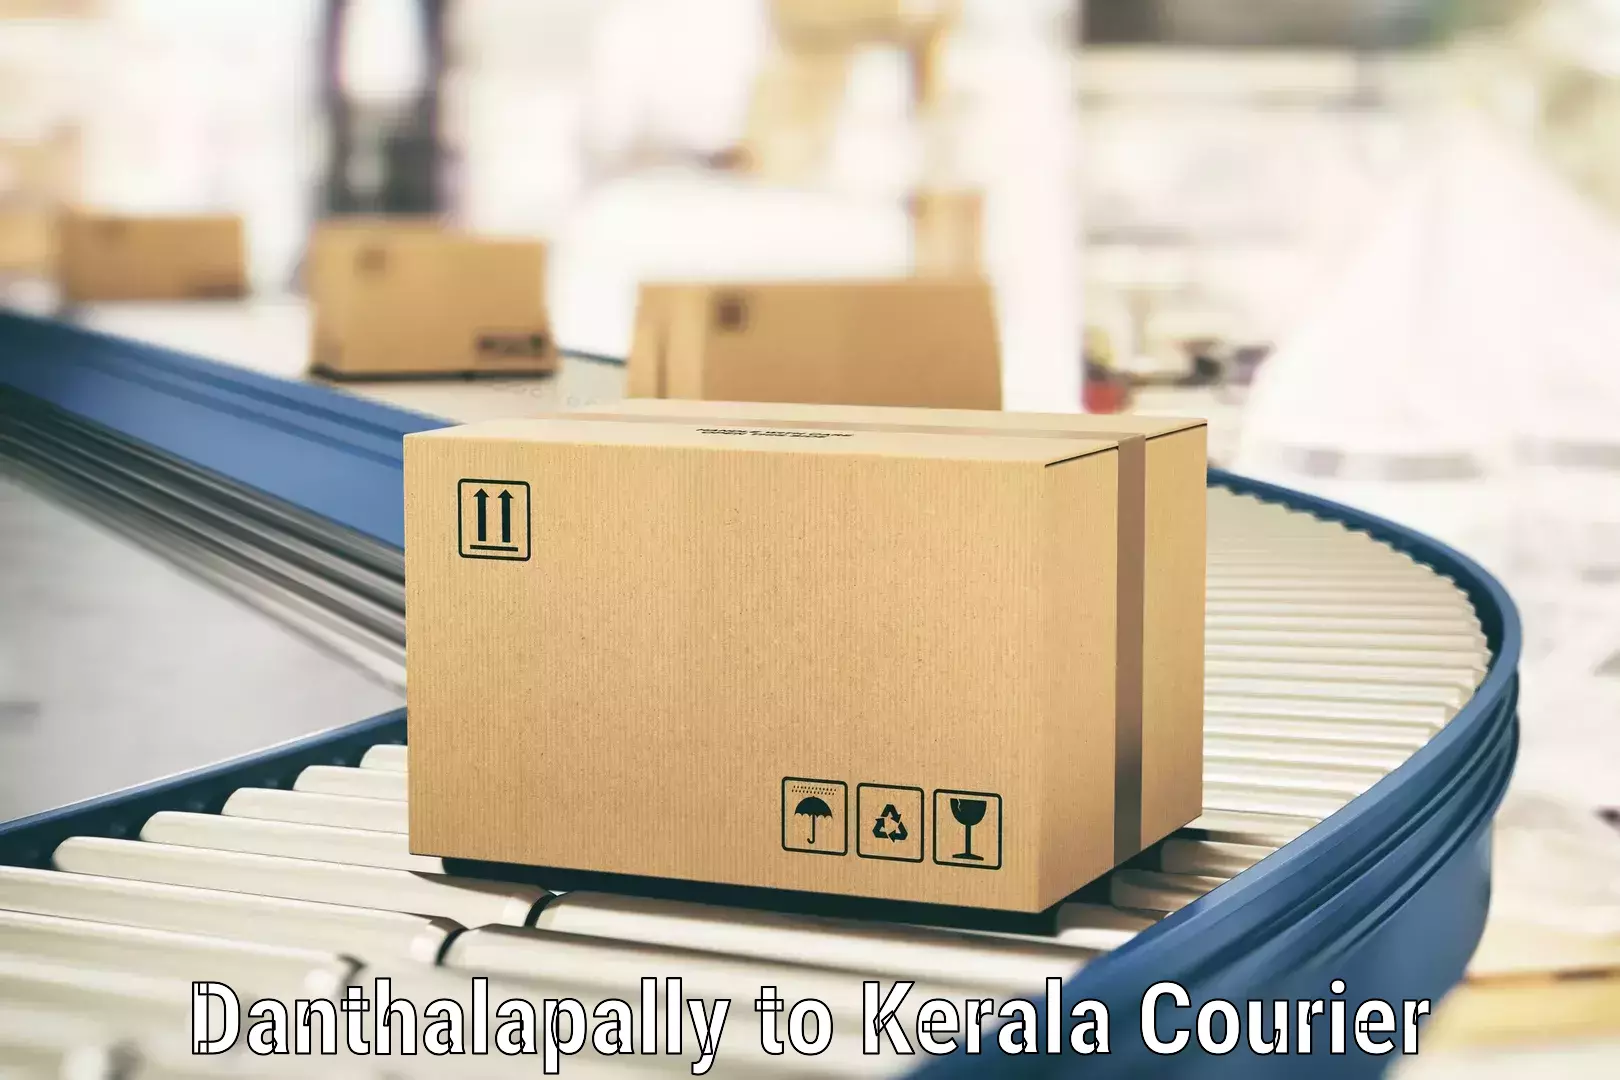 State-of-the-art courier technology Danthalapally to Tiruvalla